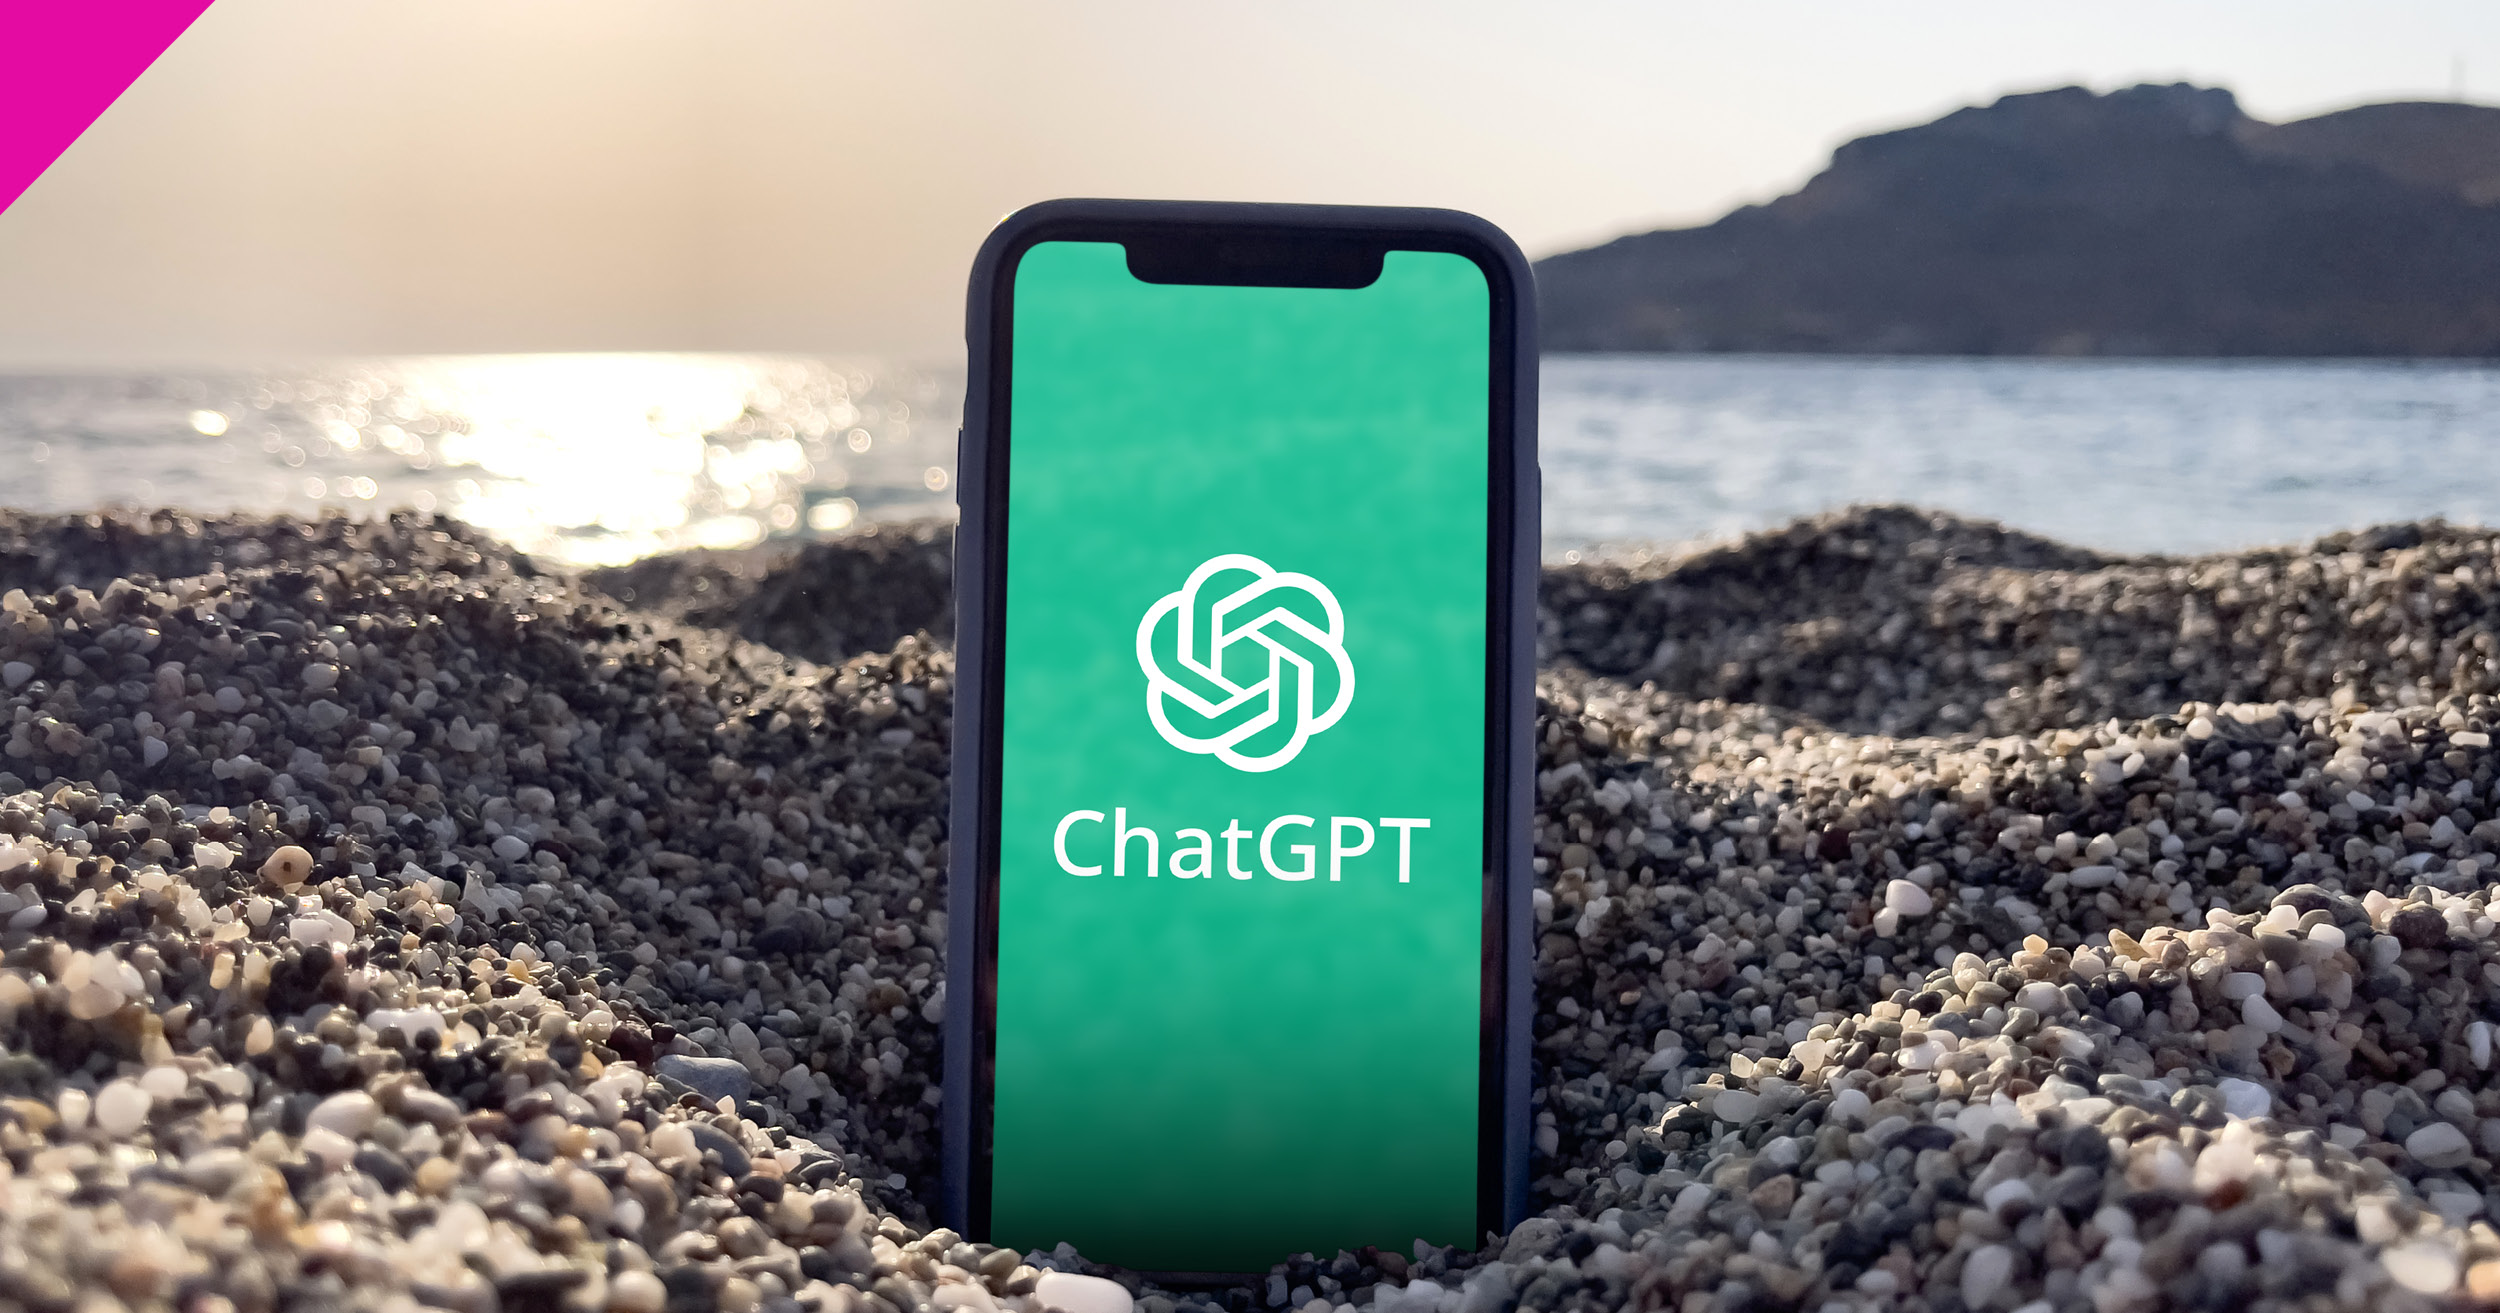 Phone on beach with ChatGPT logo on screen